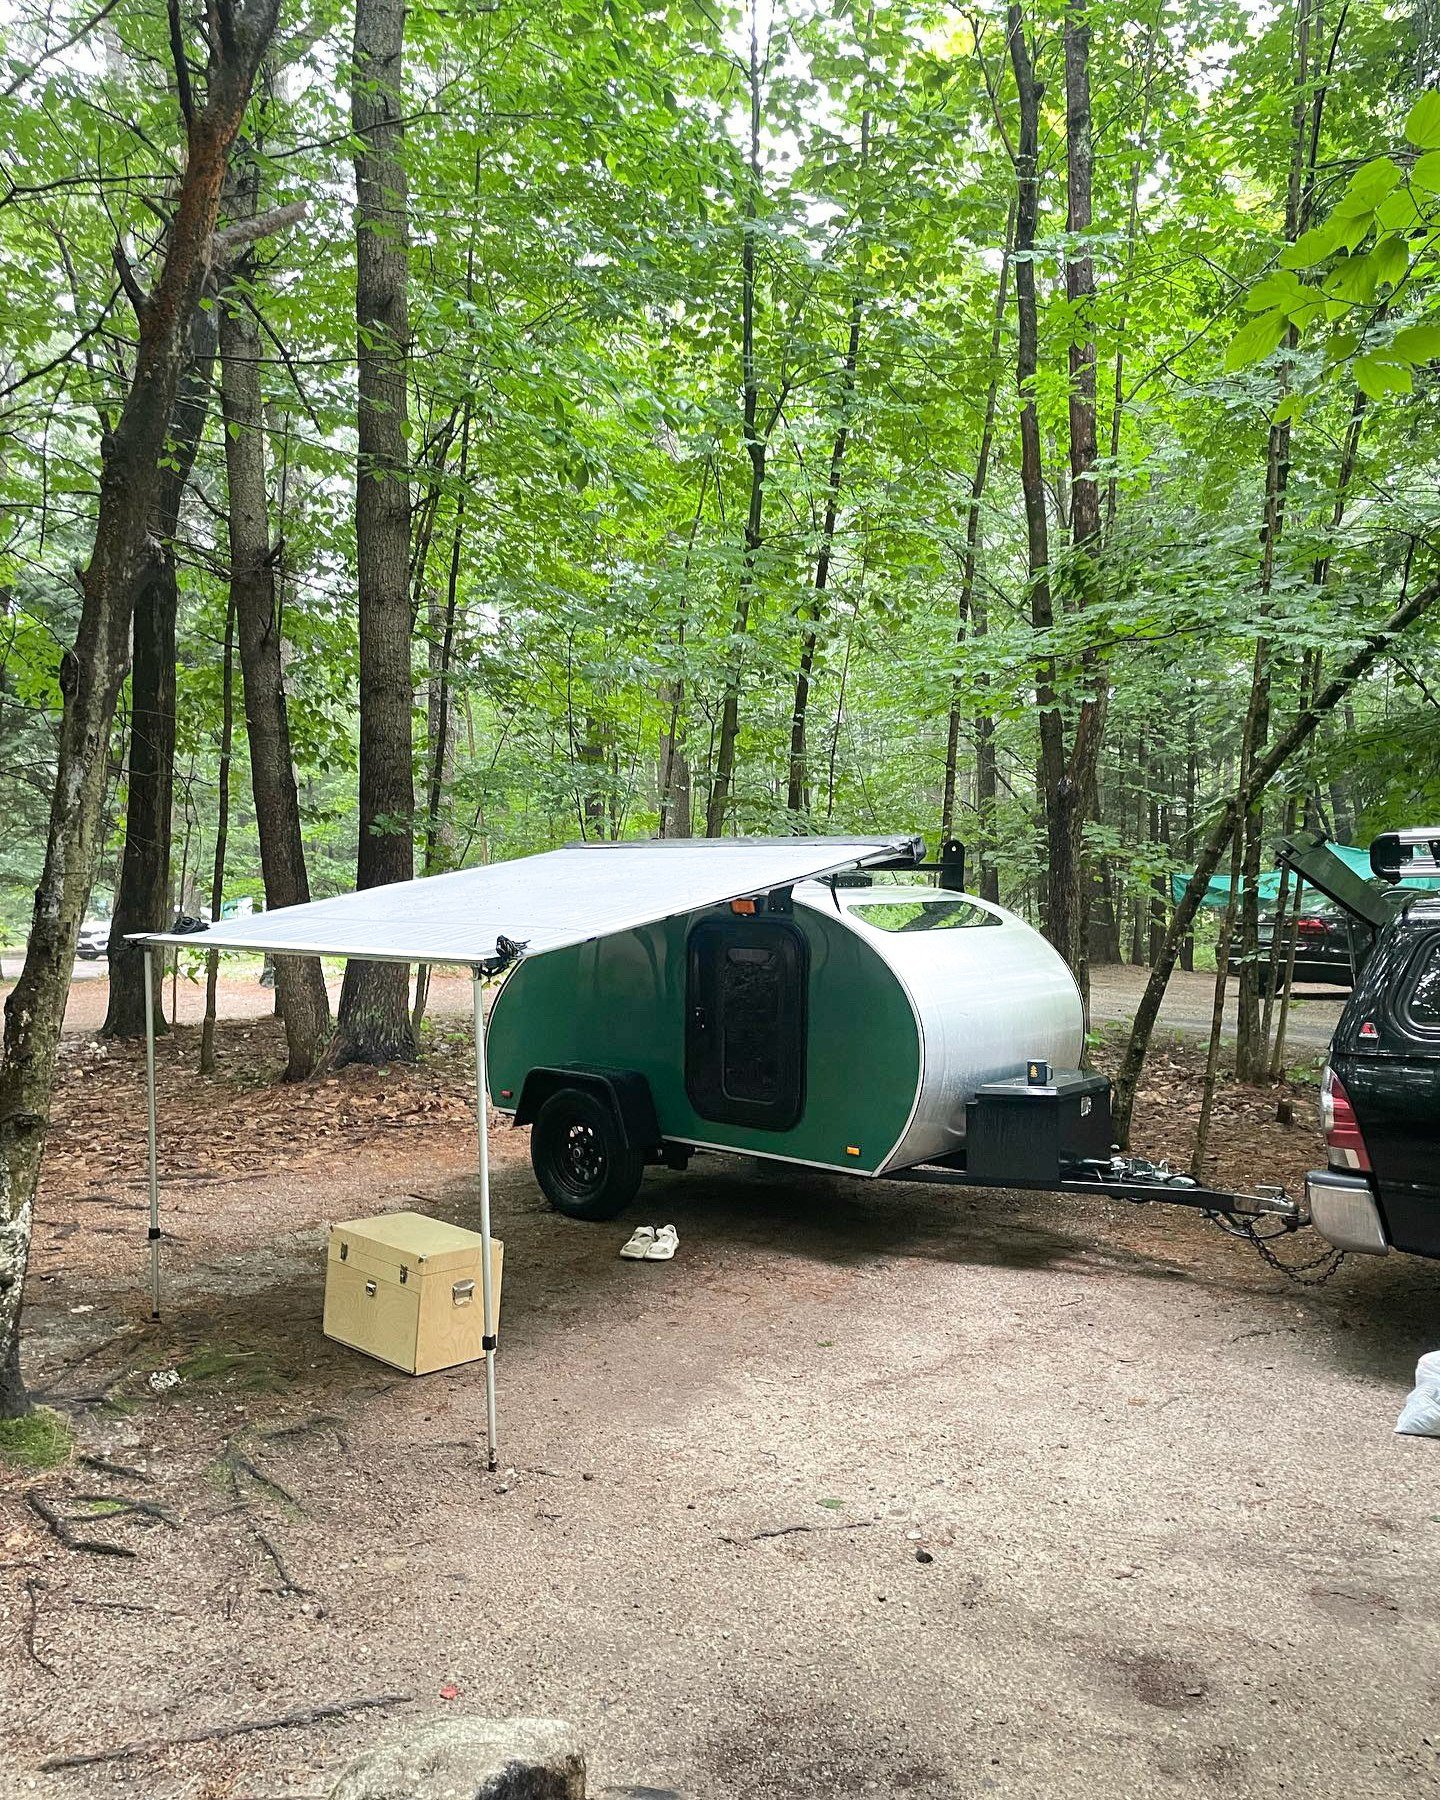 It&rsquo;s Feature Friday!🎉

We are excited to share @keenanlukereynolds @klay.house 's build in Massachusetts! They dreamed of owning a teardrop camper after nearly a month of setting up and tearing down a tent every day on a cross-country road tri